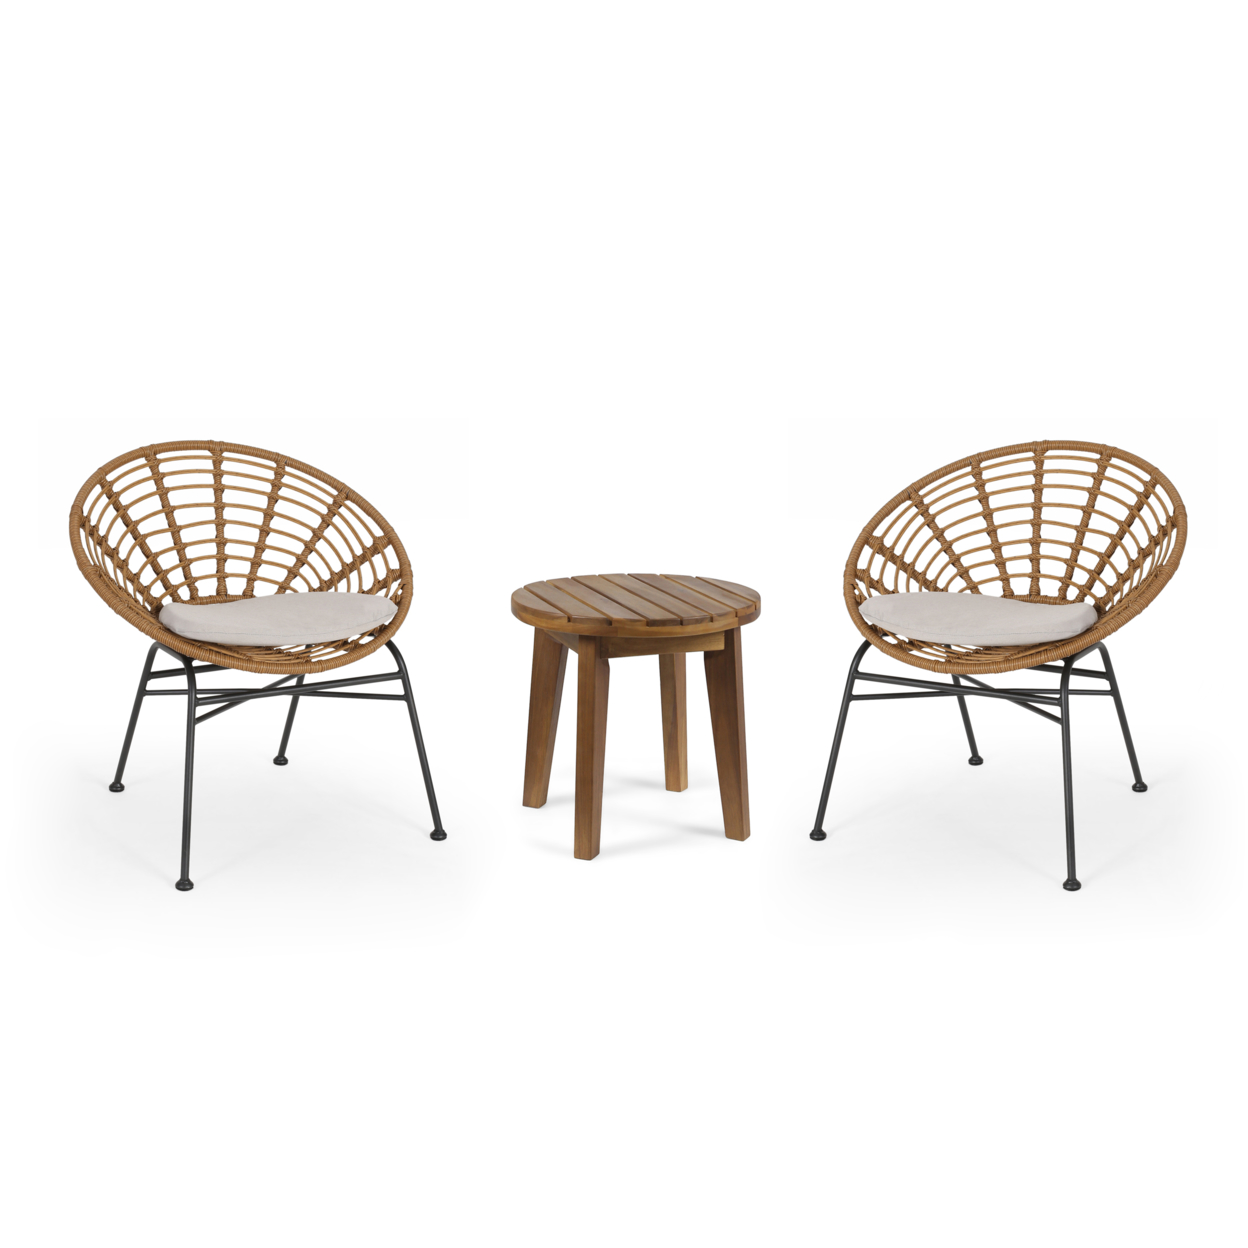 Heloise Outdoor 2 Seater Acacia Wood Chat Set - Light Brown, Beige, Teak Finish